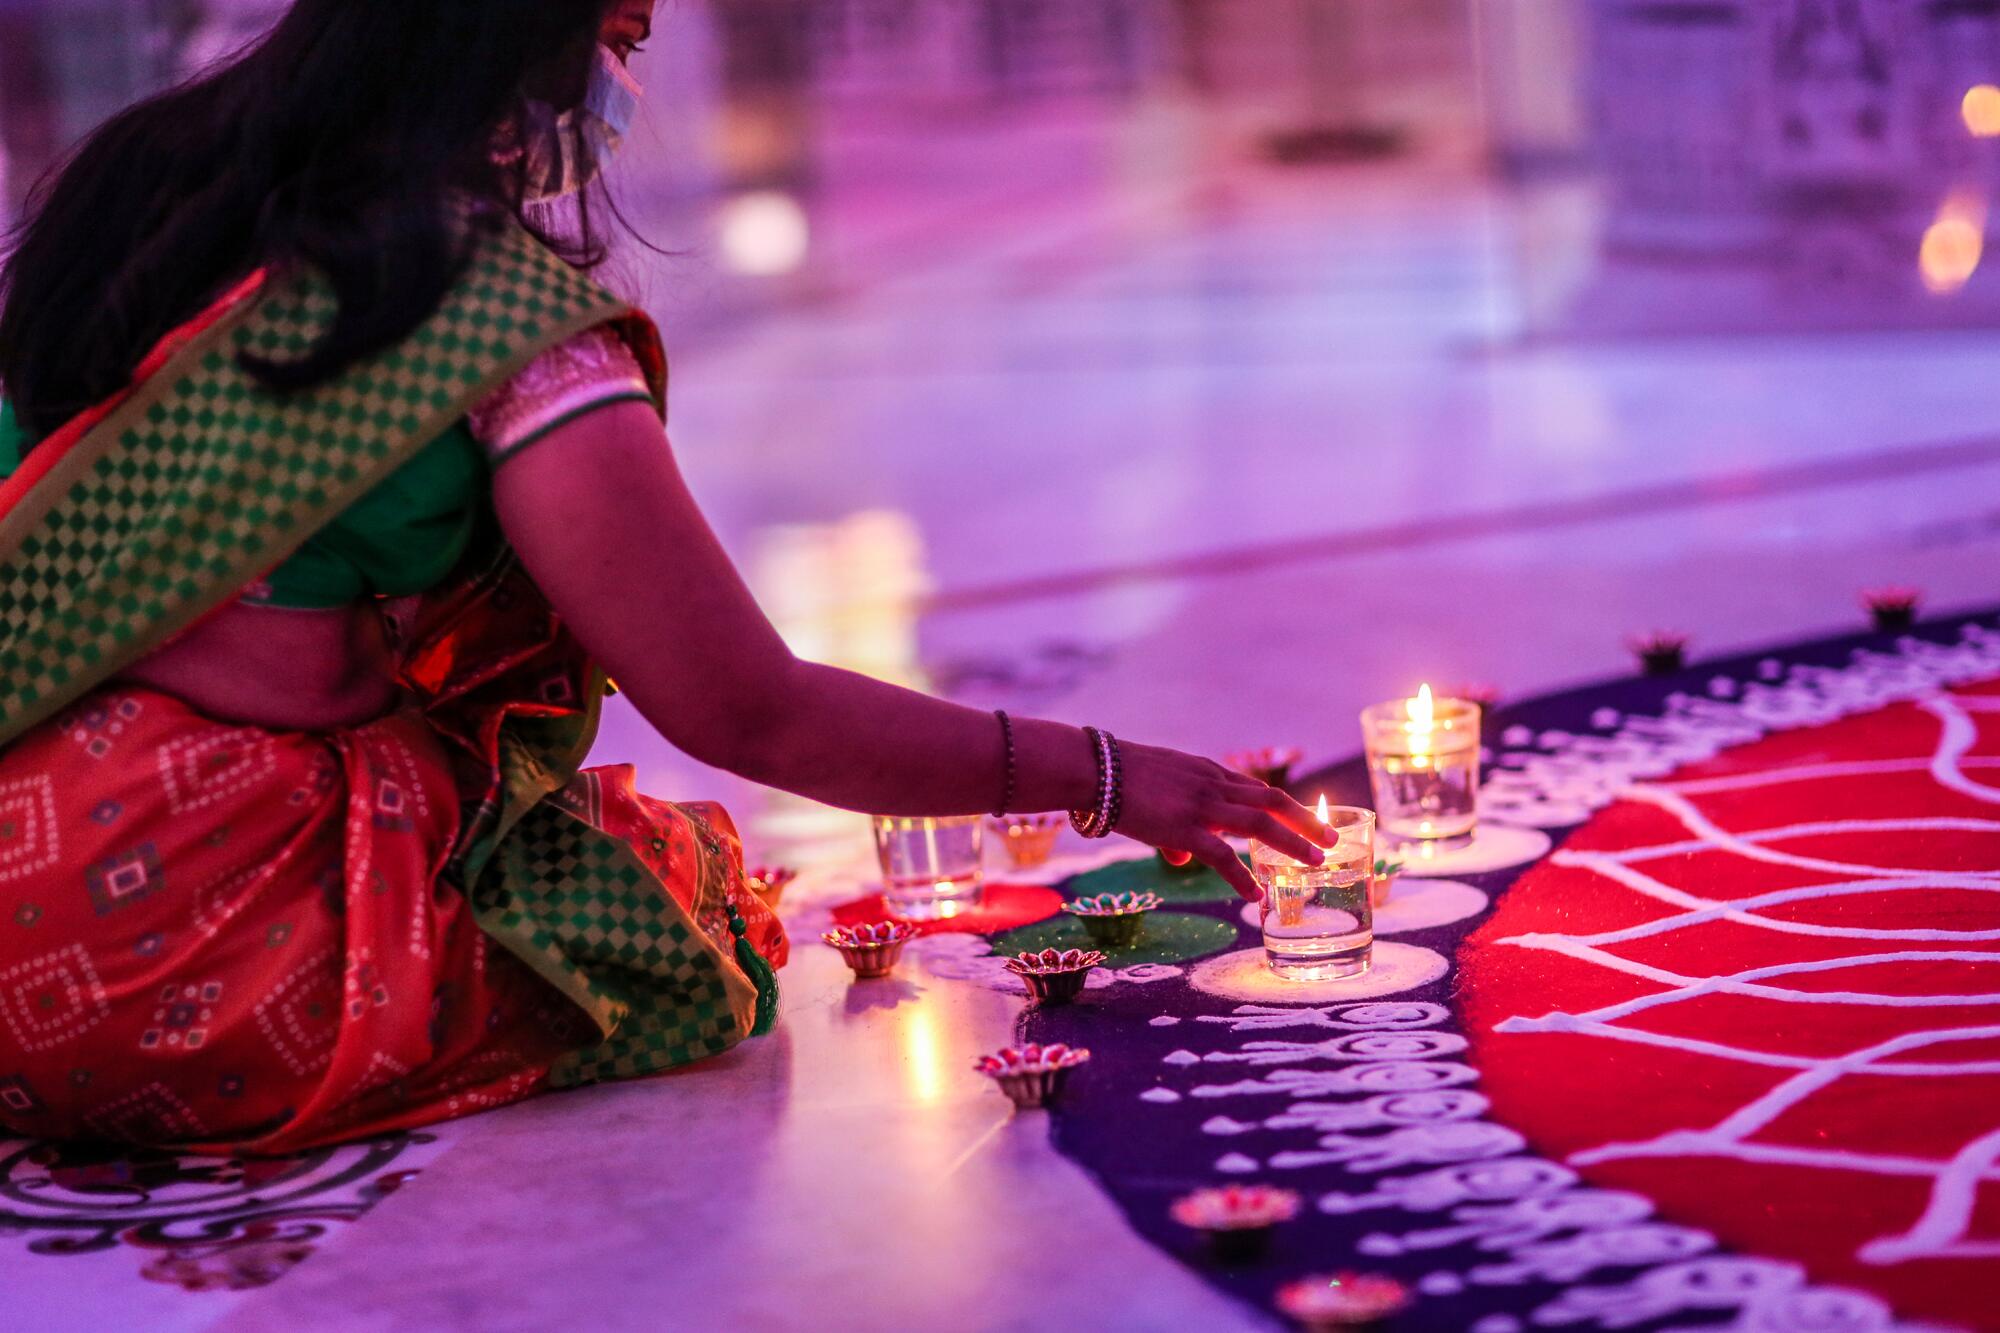 A woman kneels and places a candle on the edge of an intricate work of sand art inside a Hindu temple